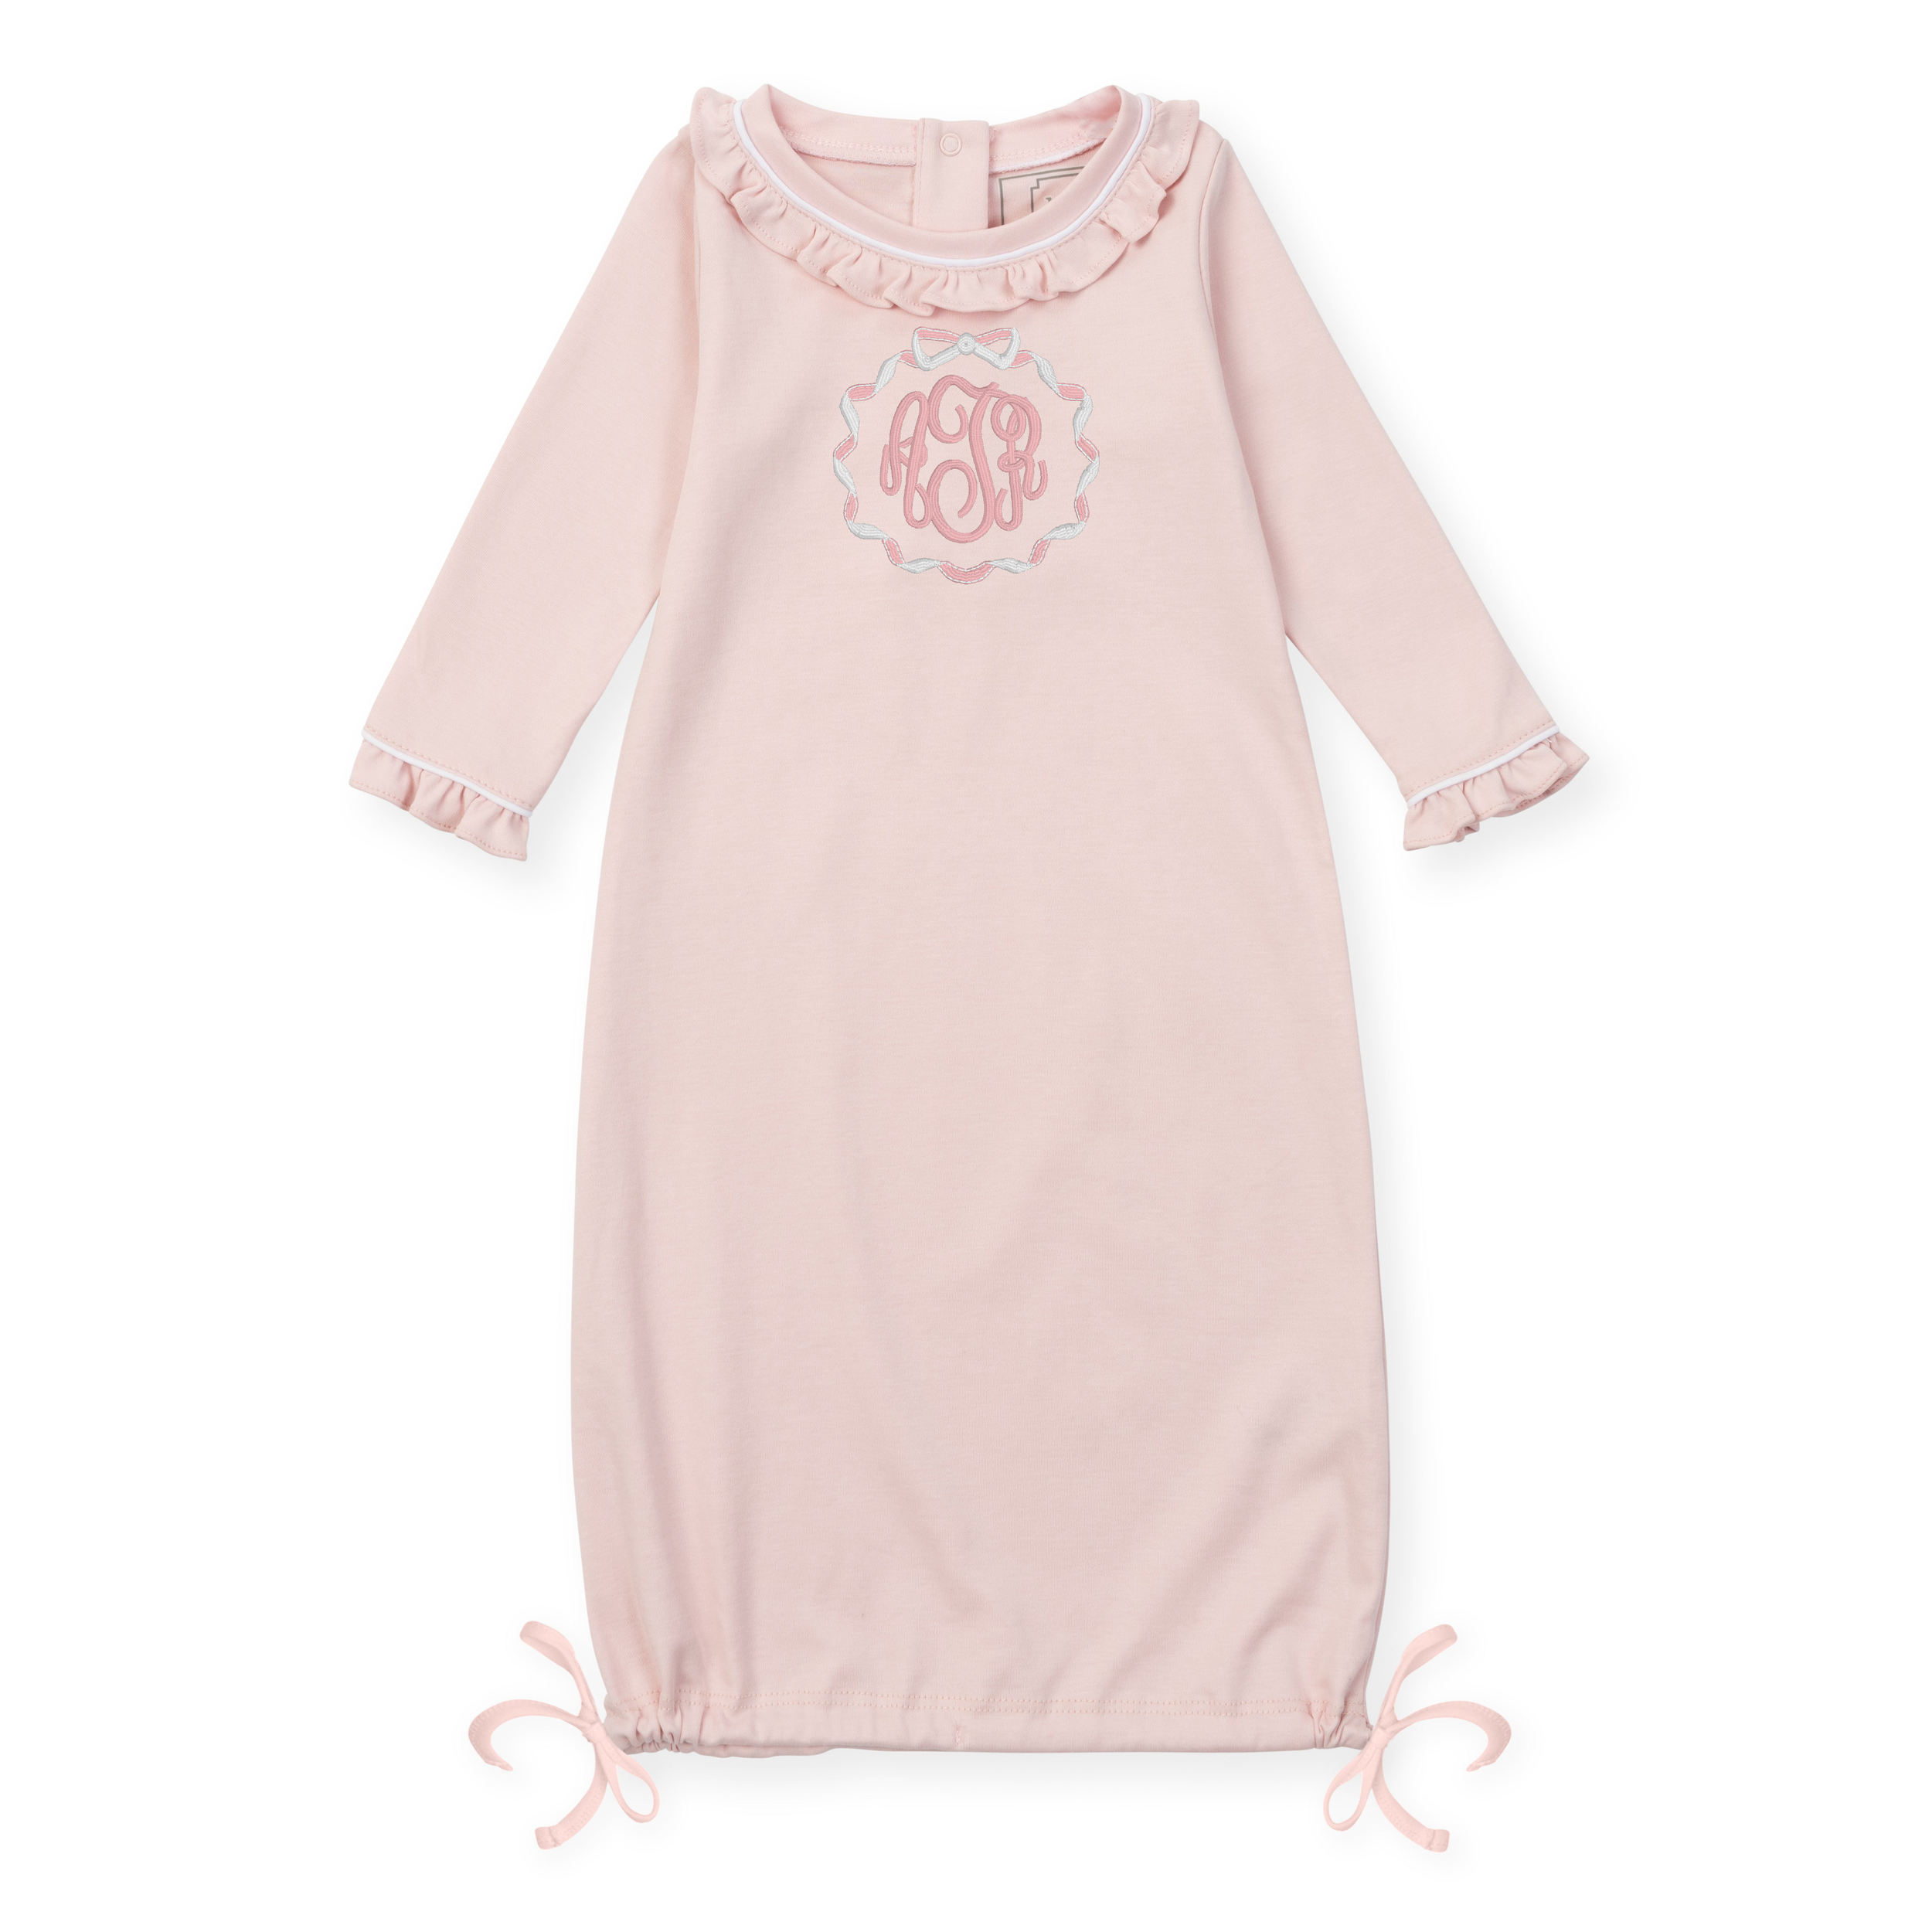 Georgia Pima Cotton Daygown for Girls - Light Pink with White Piping